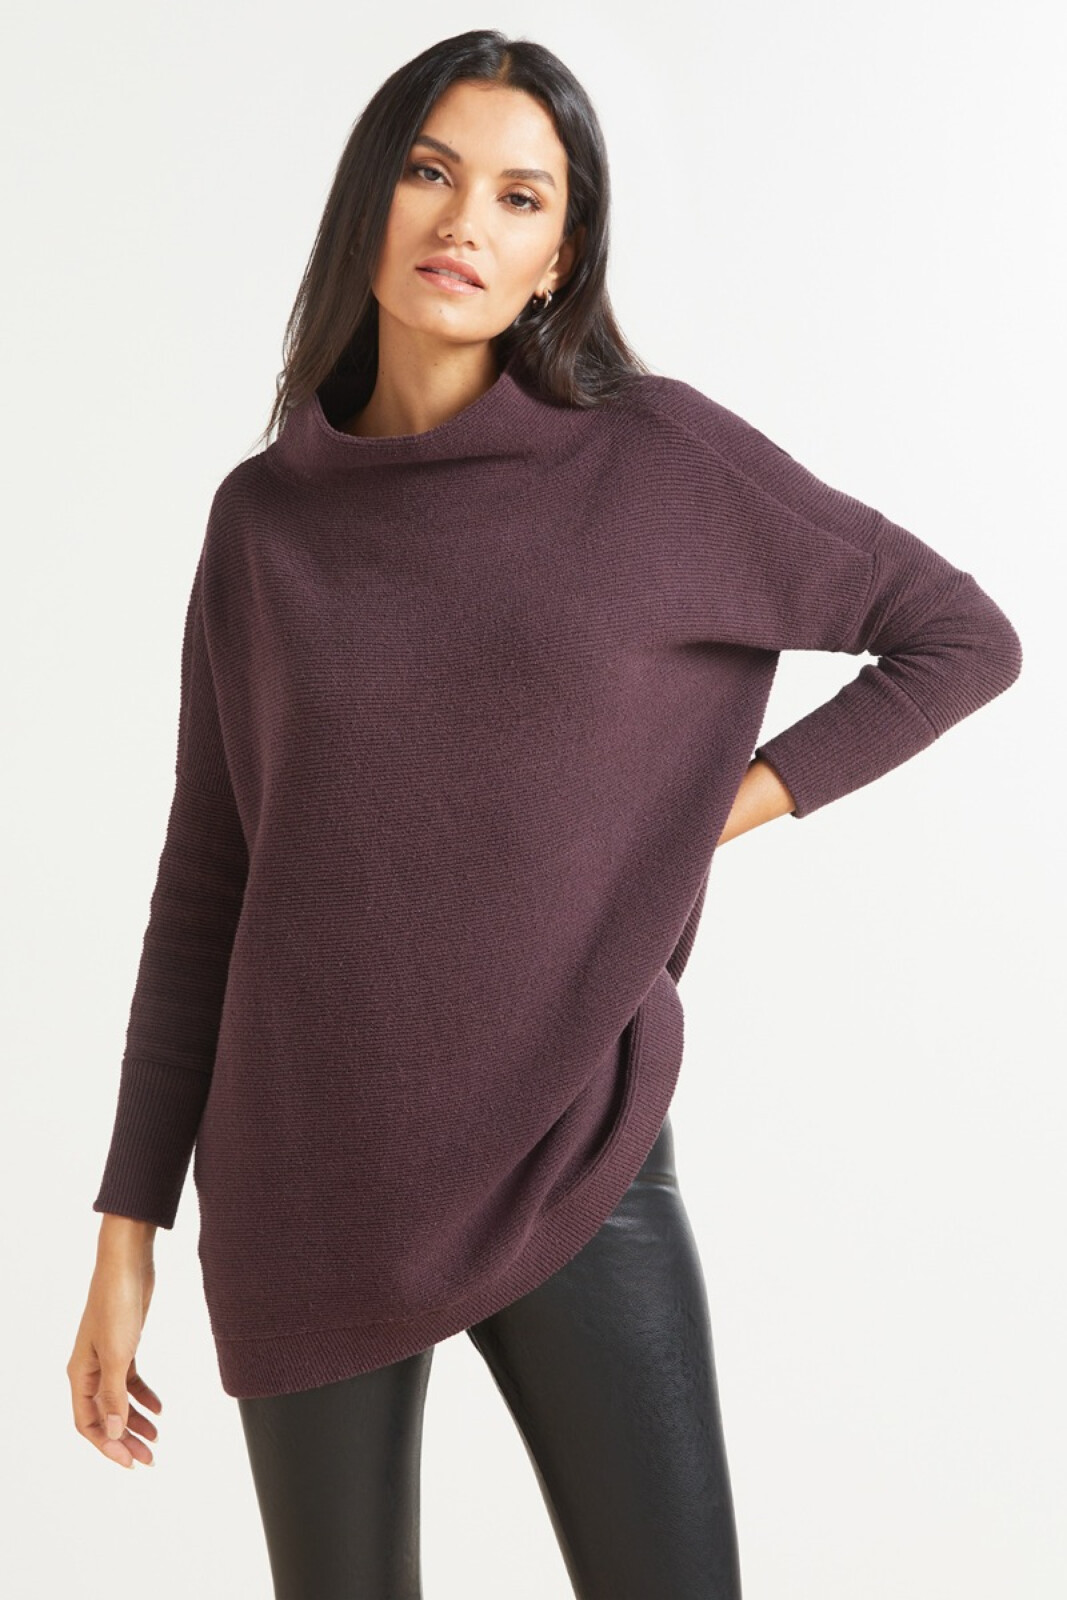 FREE PEOPLE Ottoman Tunic Pullover | EVEREVE